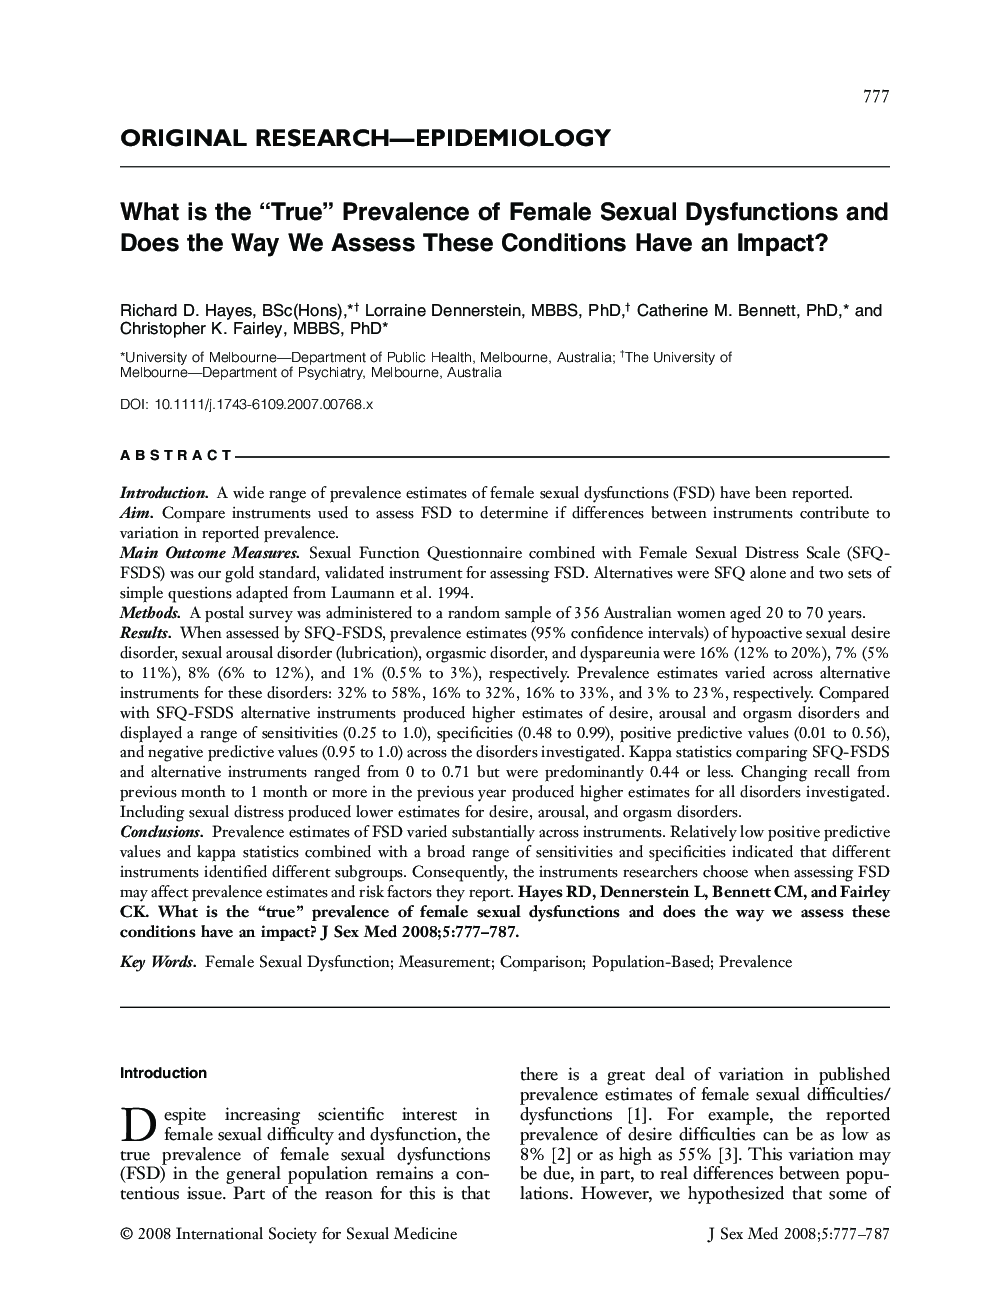 What is the “True” Prevalence of Female Sexual Dysfunctions and Does the Way We Assess These Conditions Have an Impact?